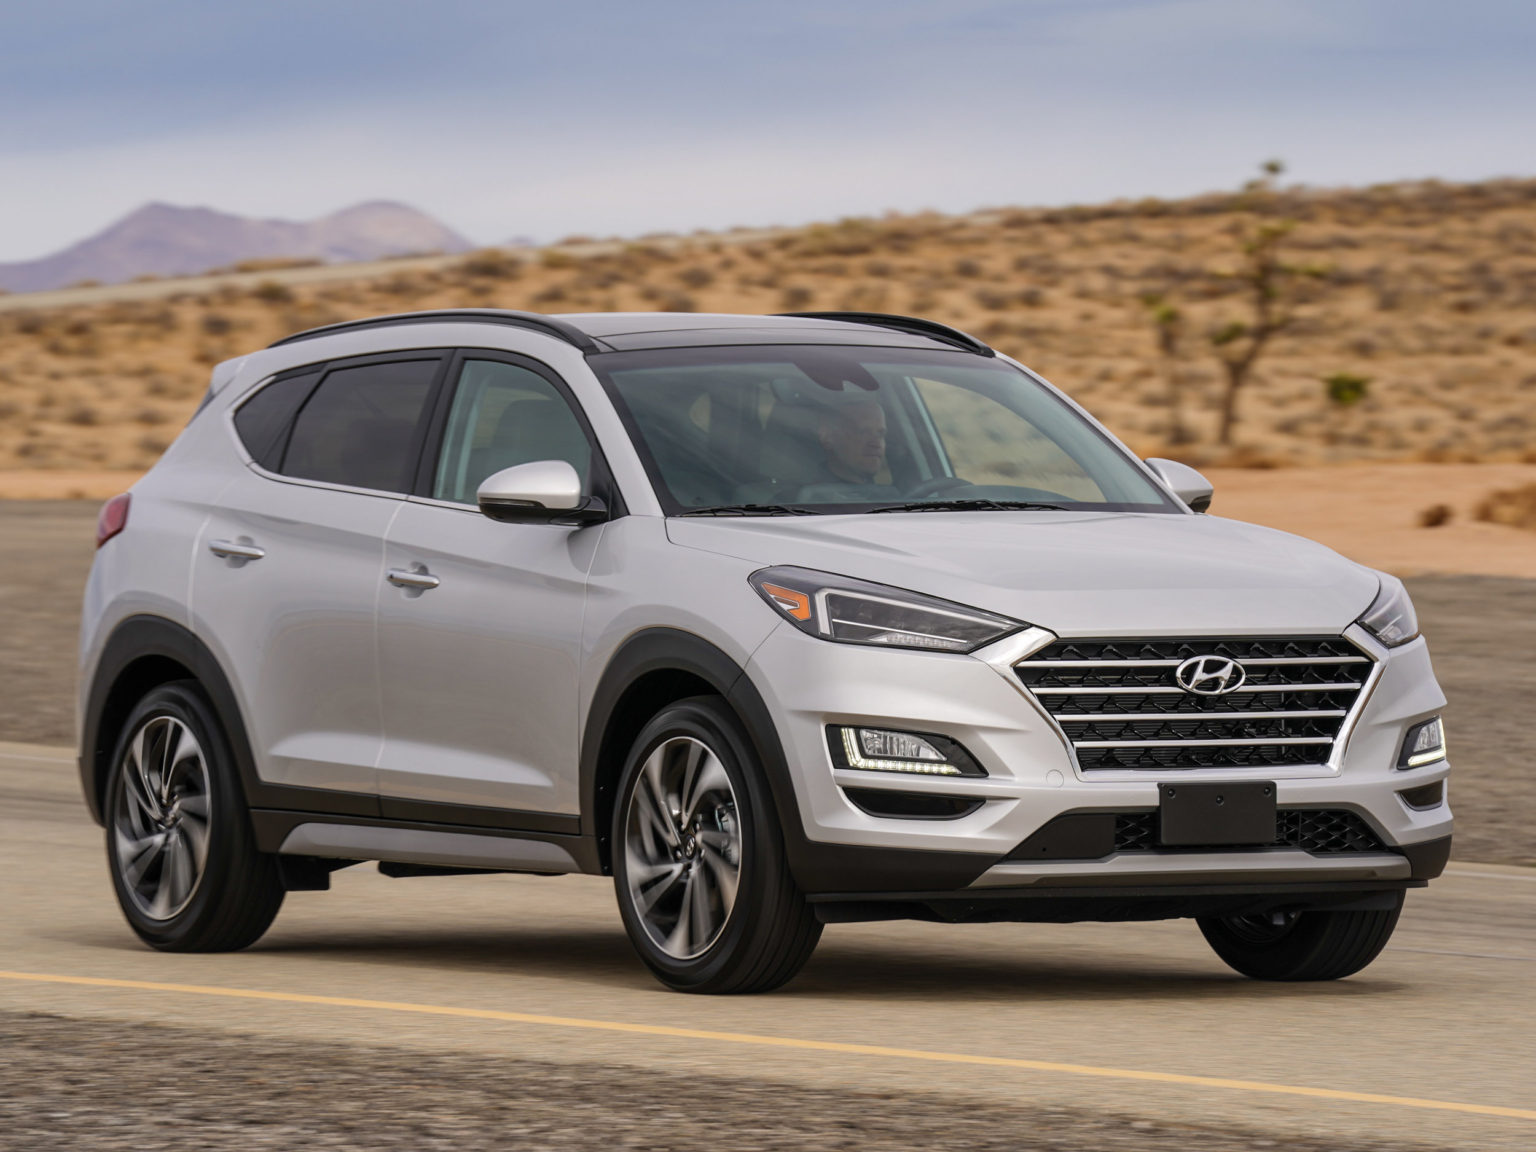 Hyundai is celebrating a sales milestone with the Tucson.